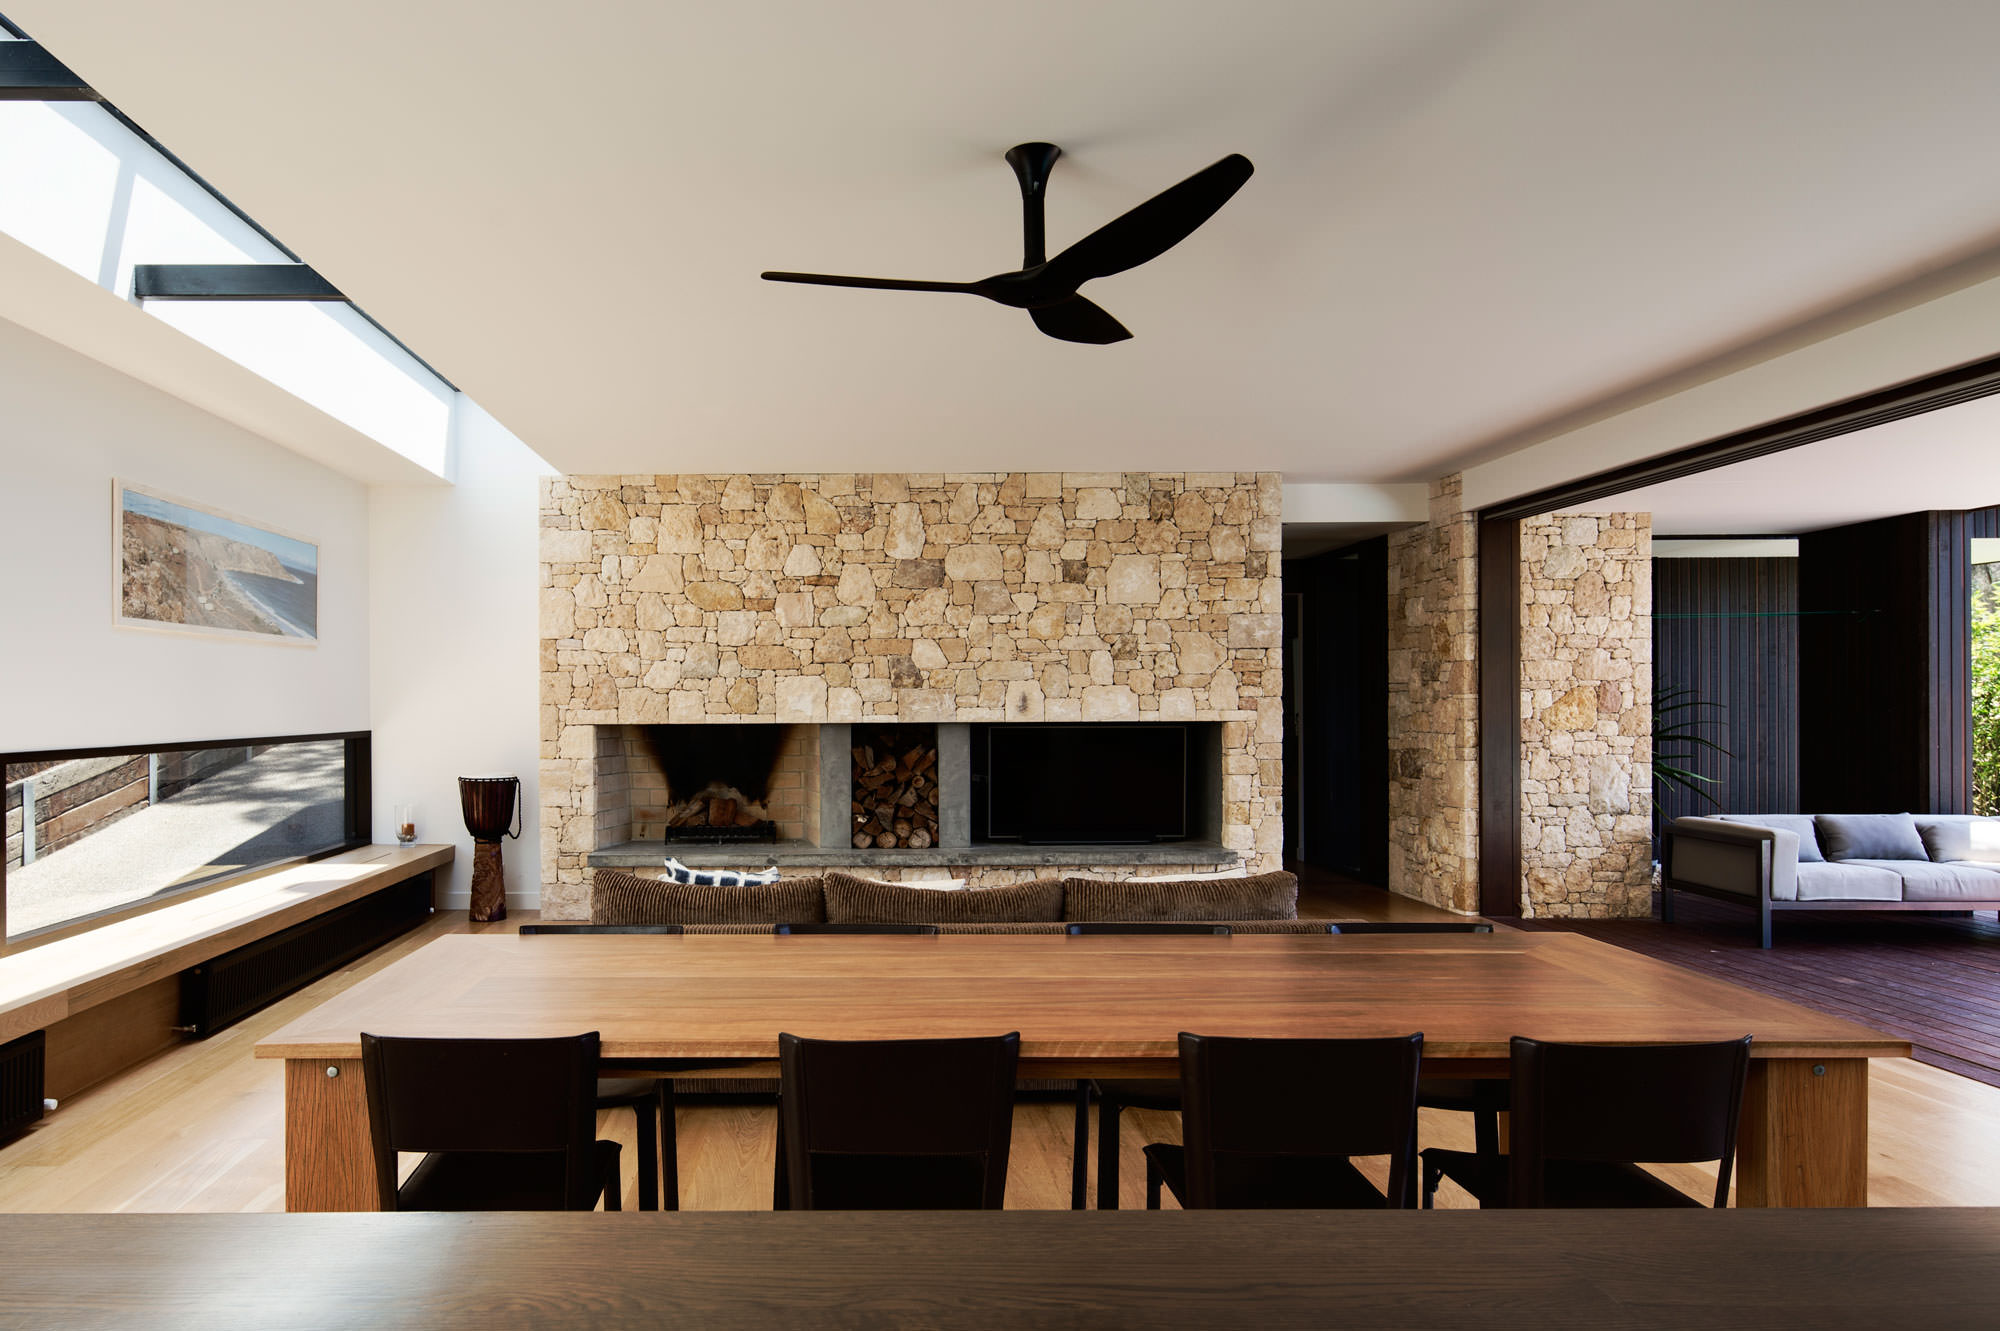 Ceiling fan in spacious dining room area.